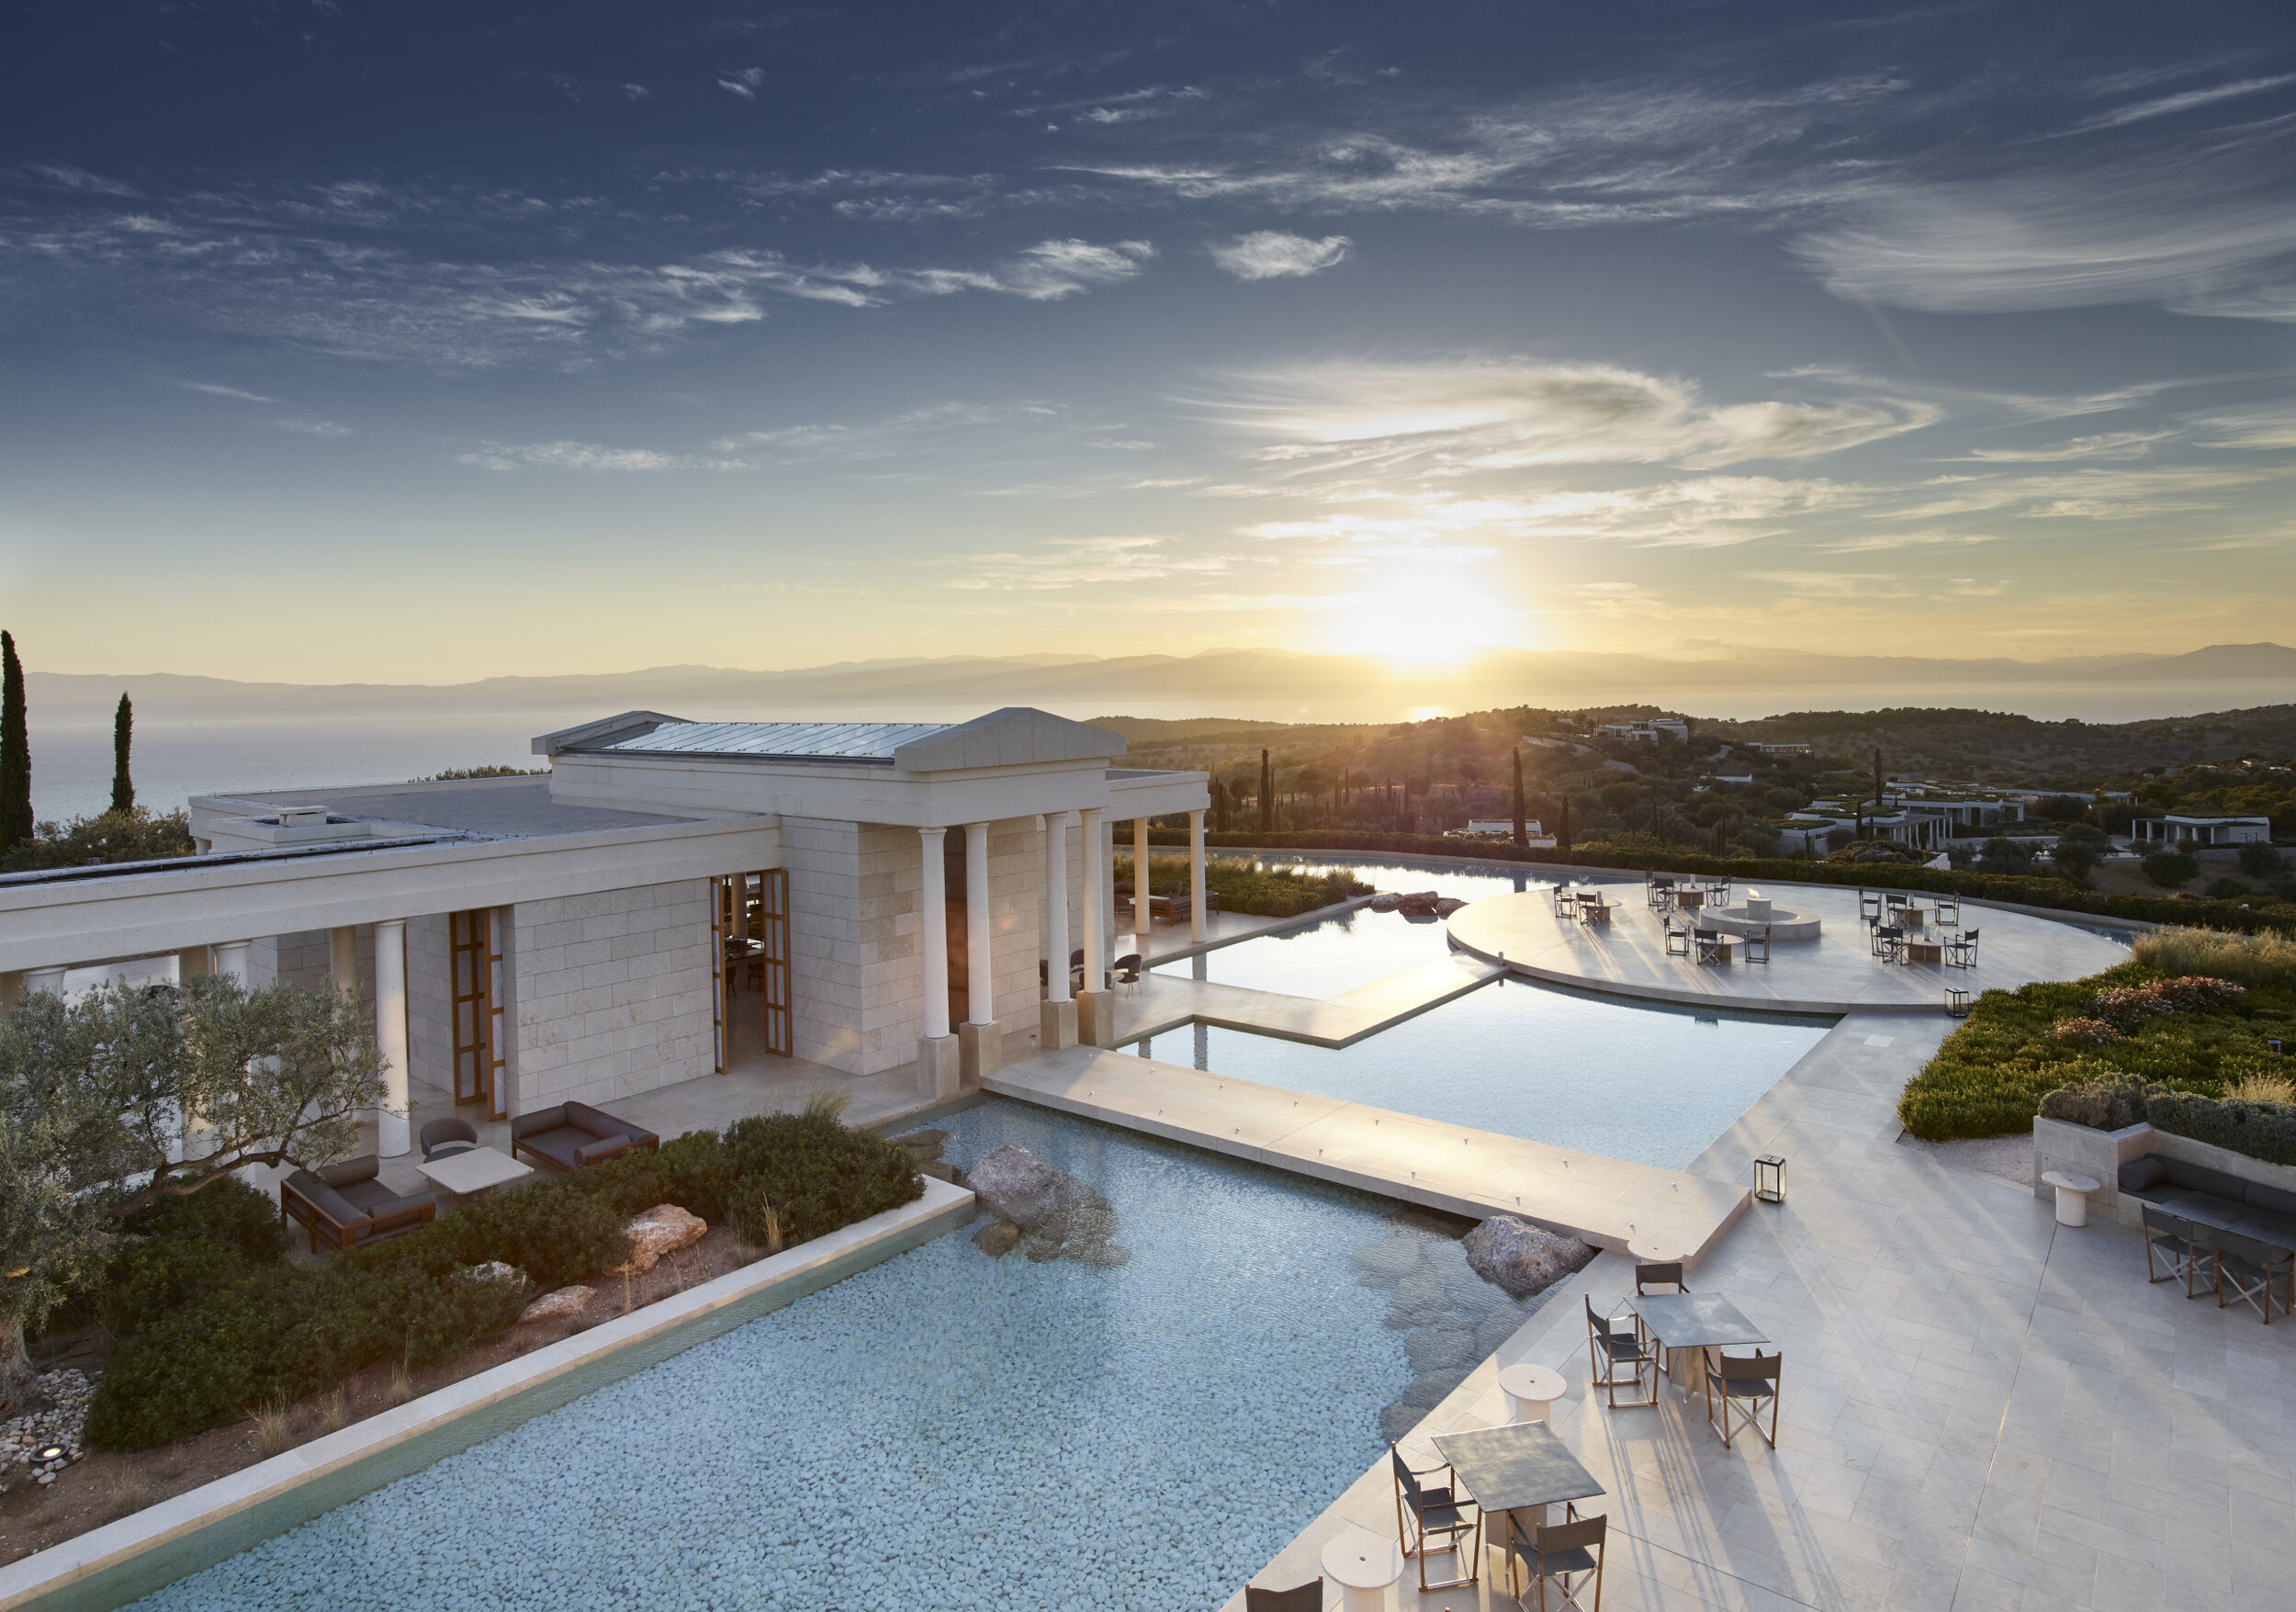 Amanzoe, Greece - Bar, Fire pit, View, Sunset, Aerial_High Res_16243.jpg